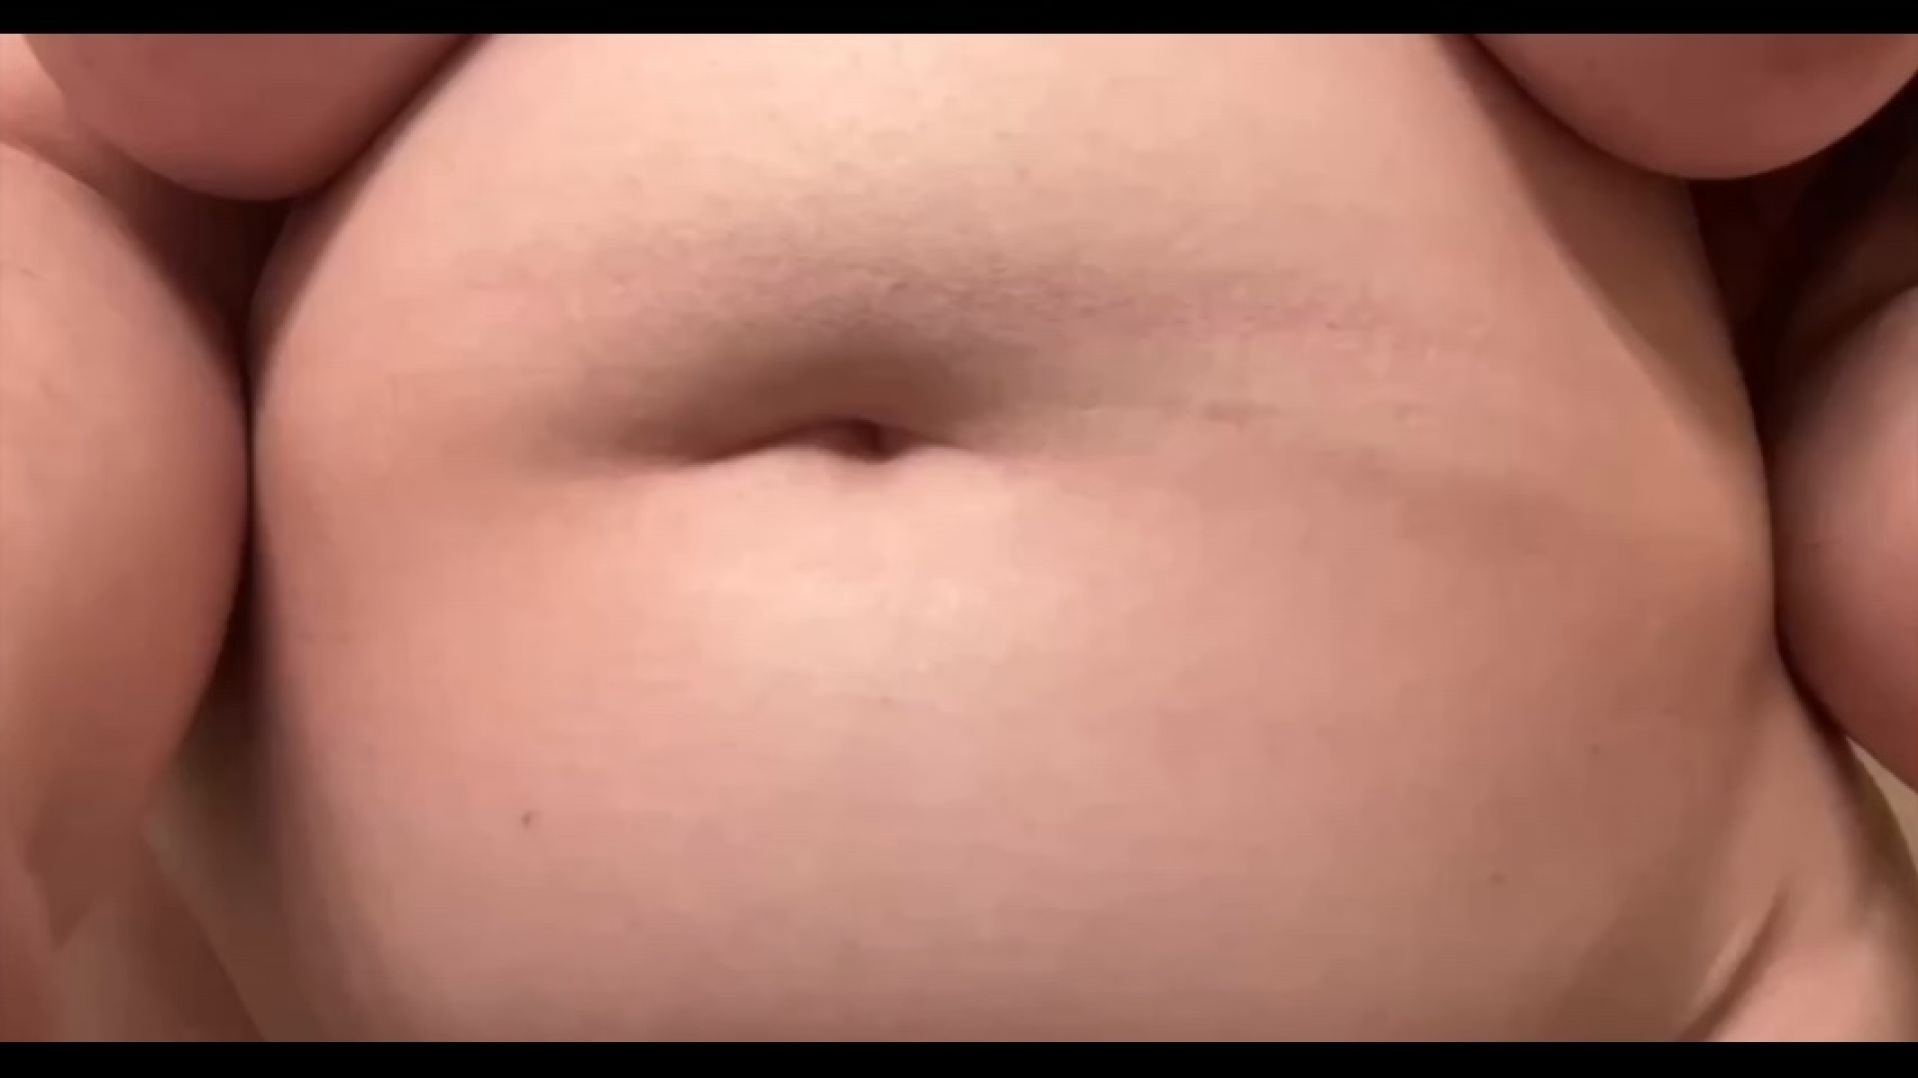 POV-You sneaked record belly button play